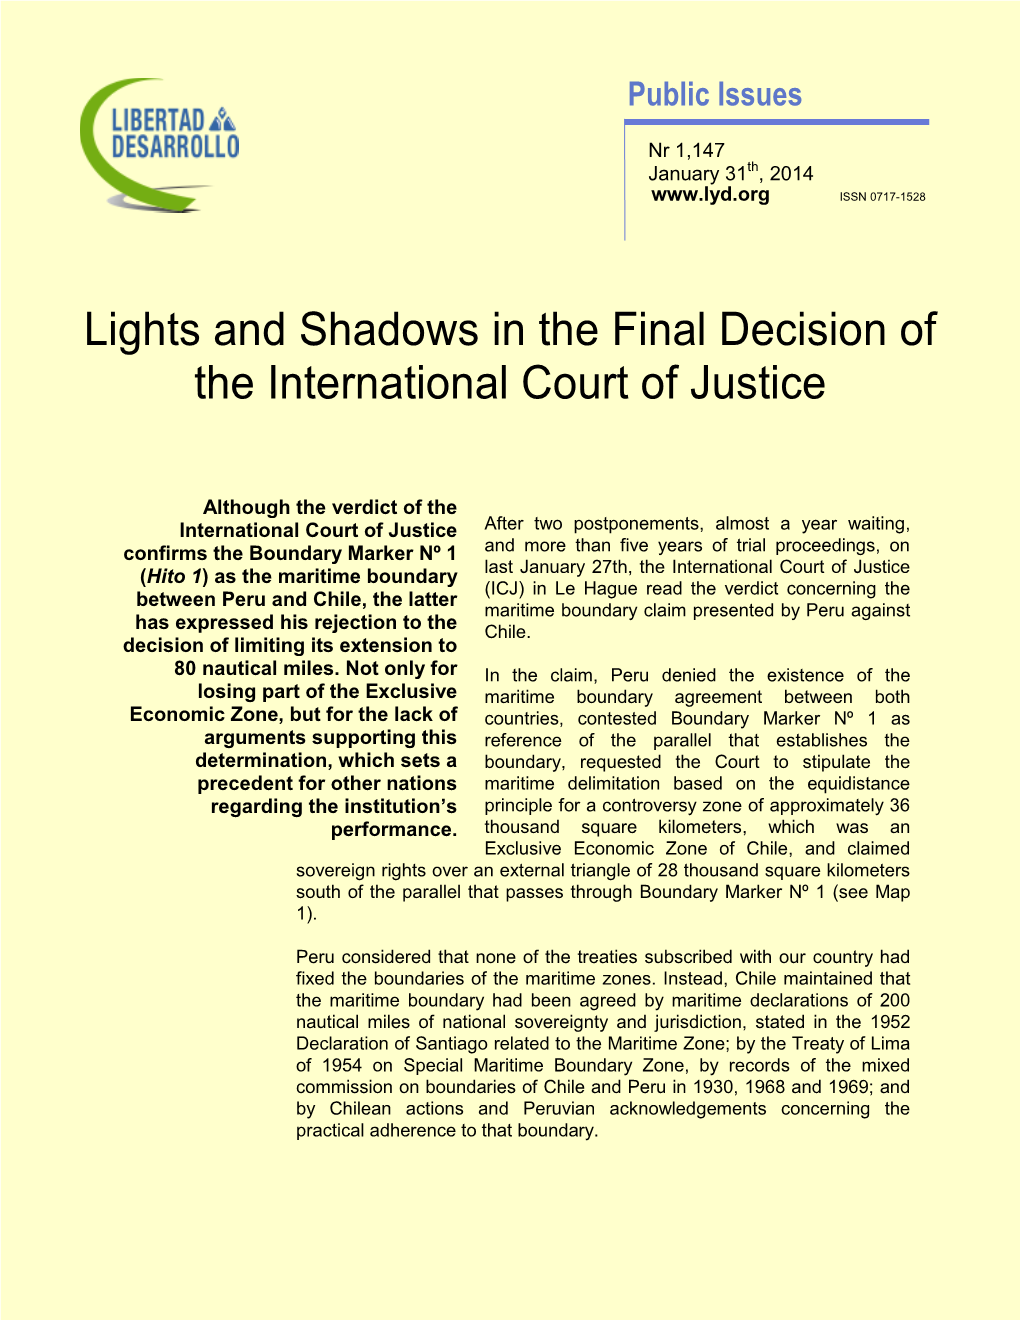 Lights and Shadows in the Final Decision of the International Court of Justice